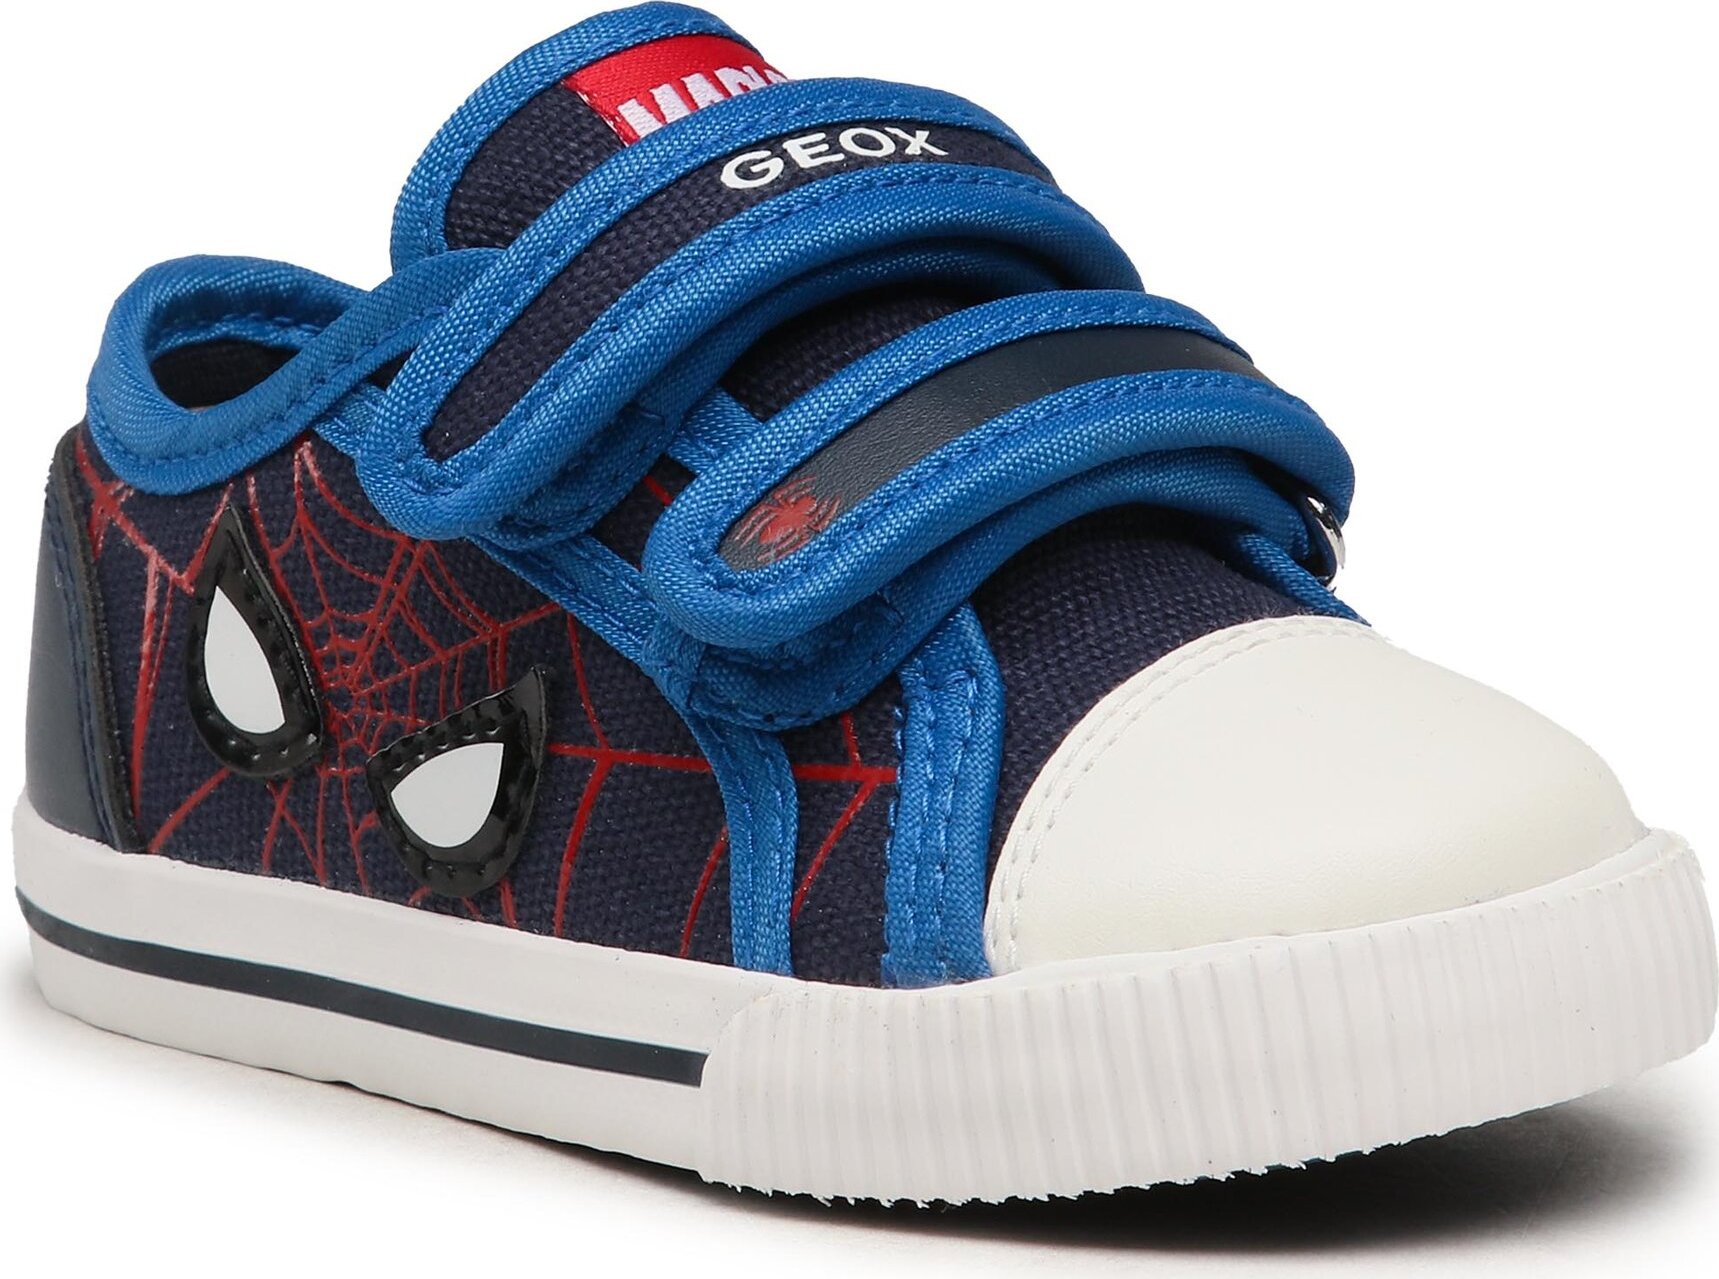 Tenisky Geox SPIDER-MAN B Kilwi B. A B35A7A 01054 C0735 M Navy/Red